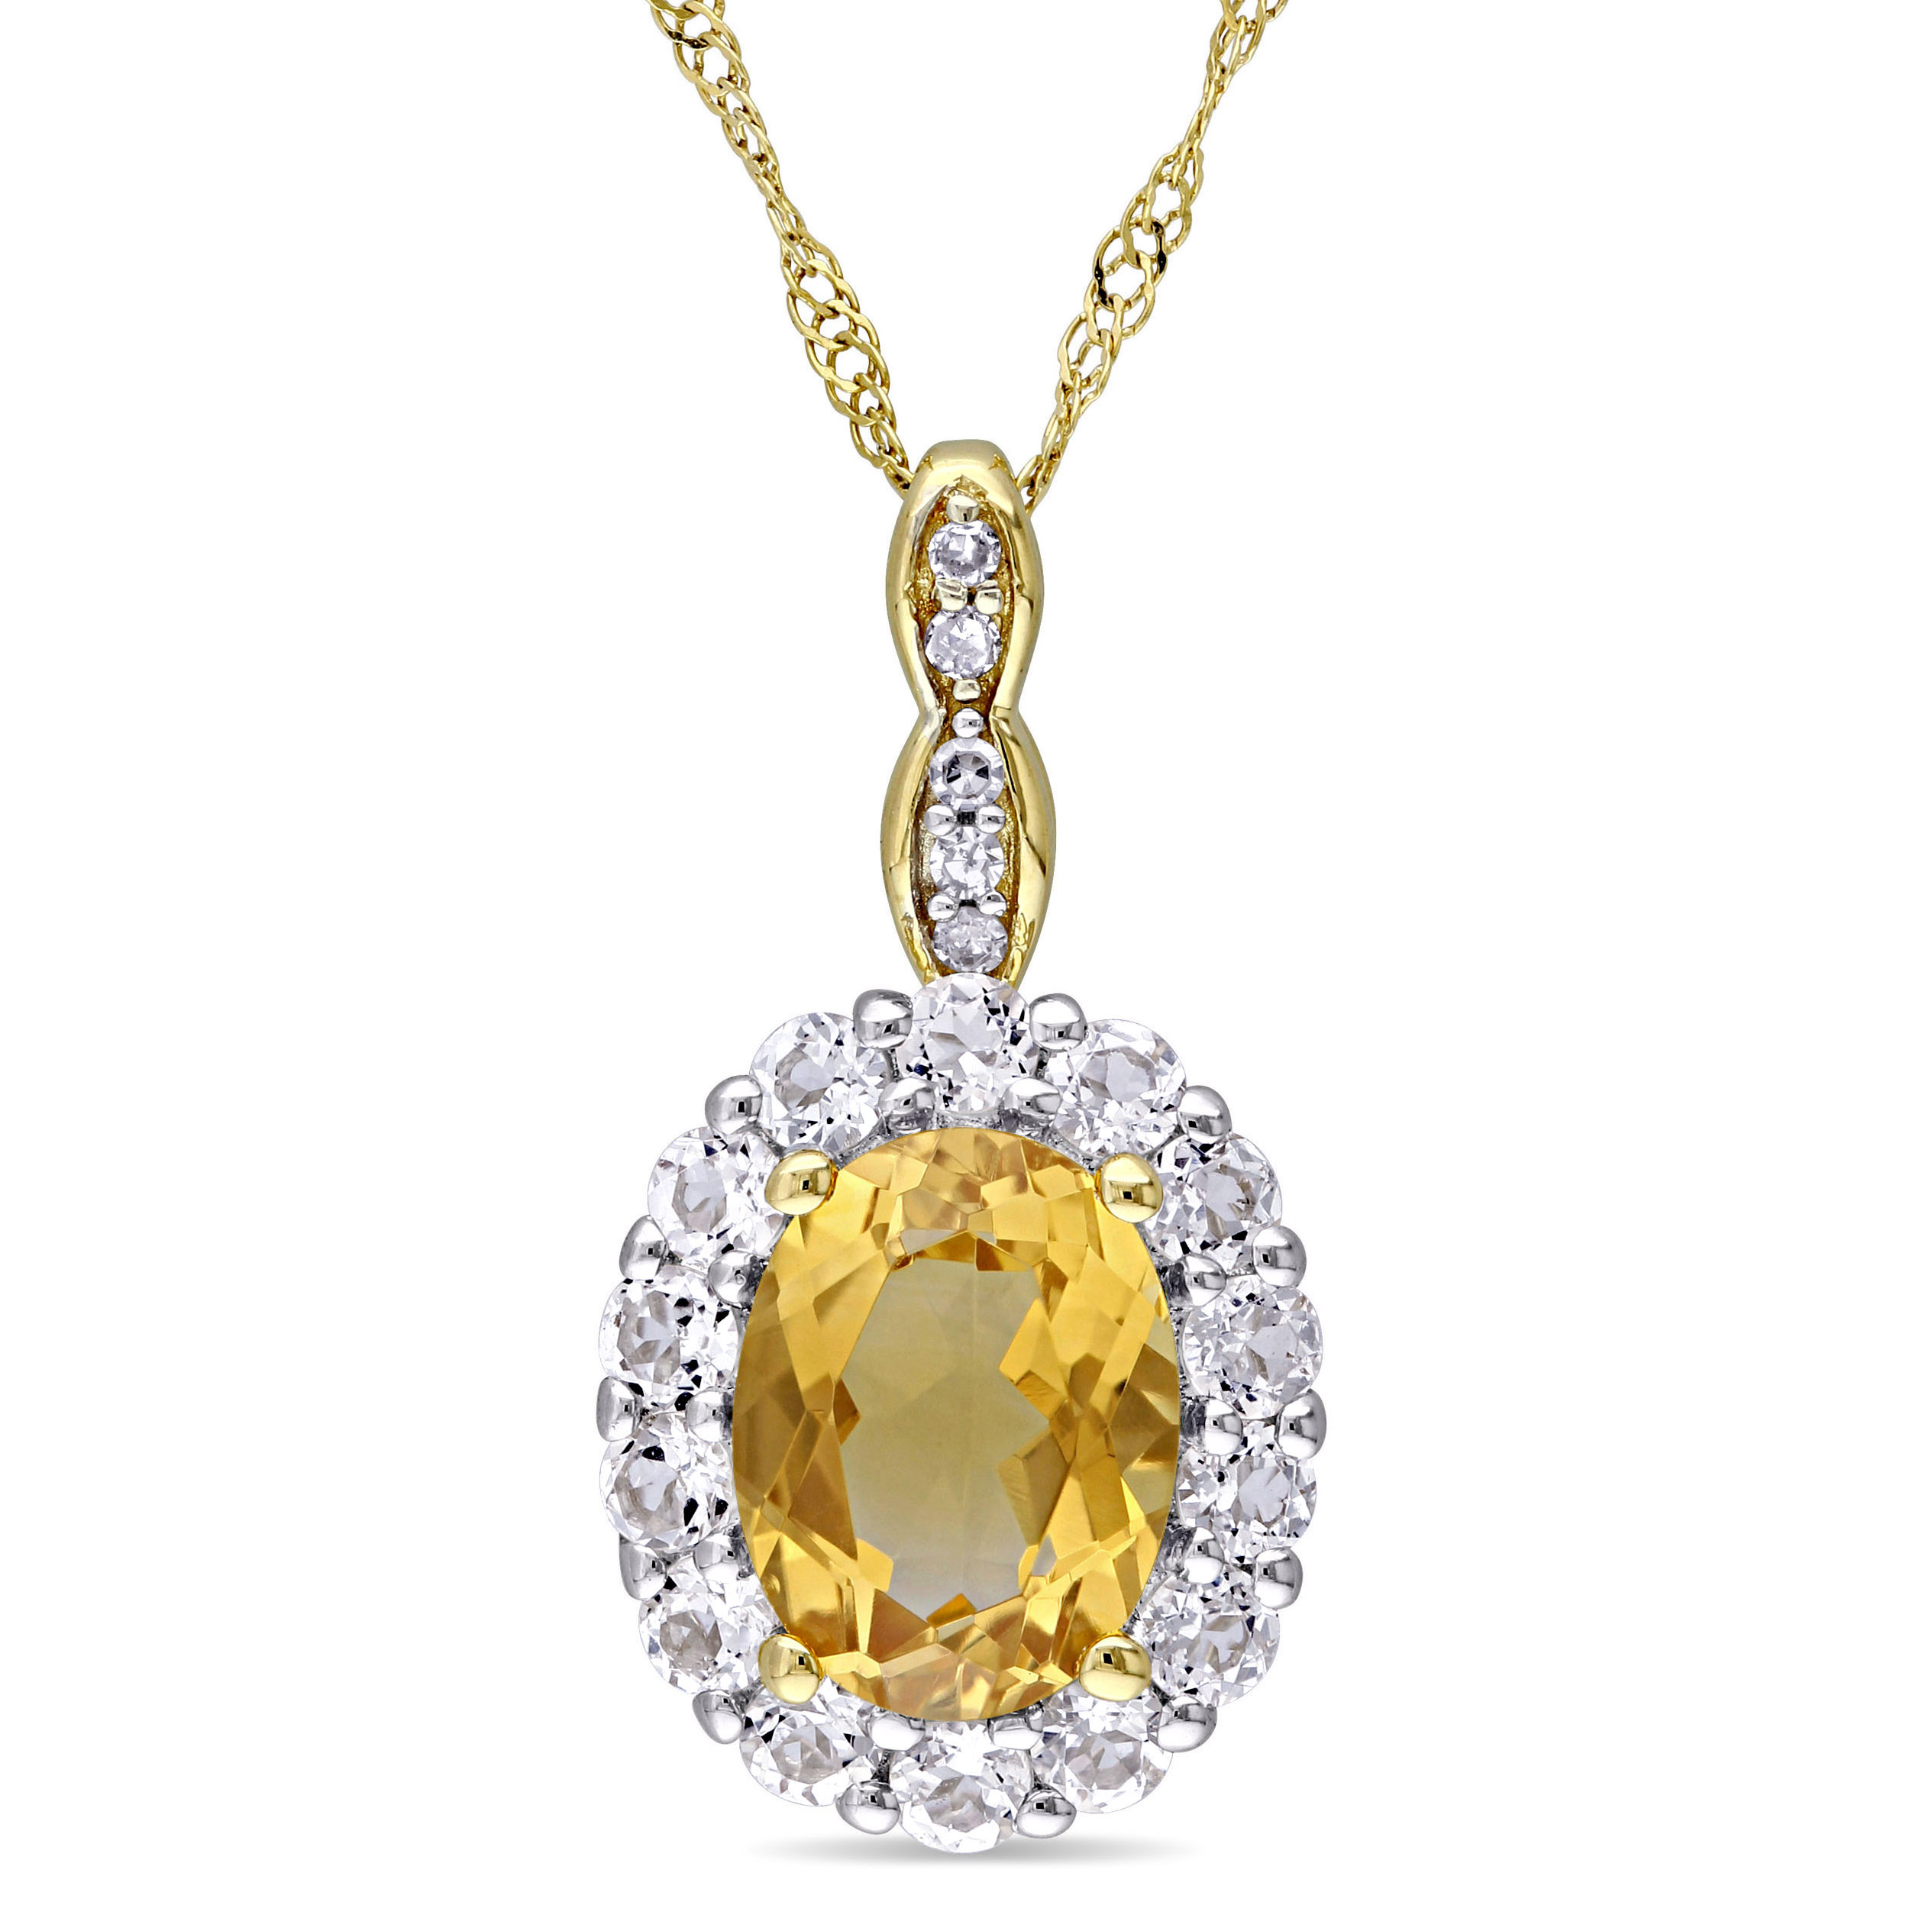 Oval Shape Citrine, White Topaz and Diamond Accent Vintage Pendant With Chain in 14k Yellow Gold